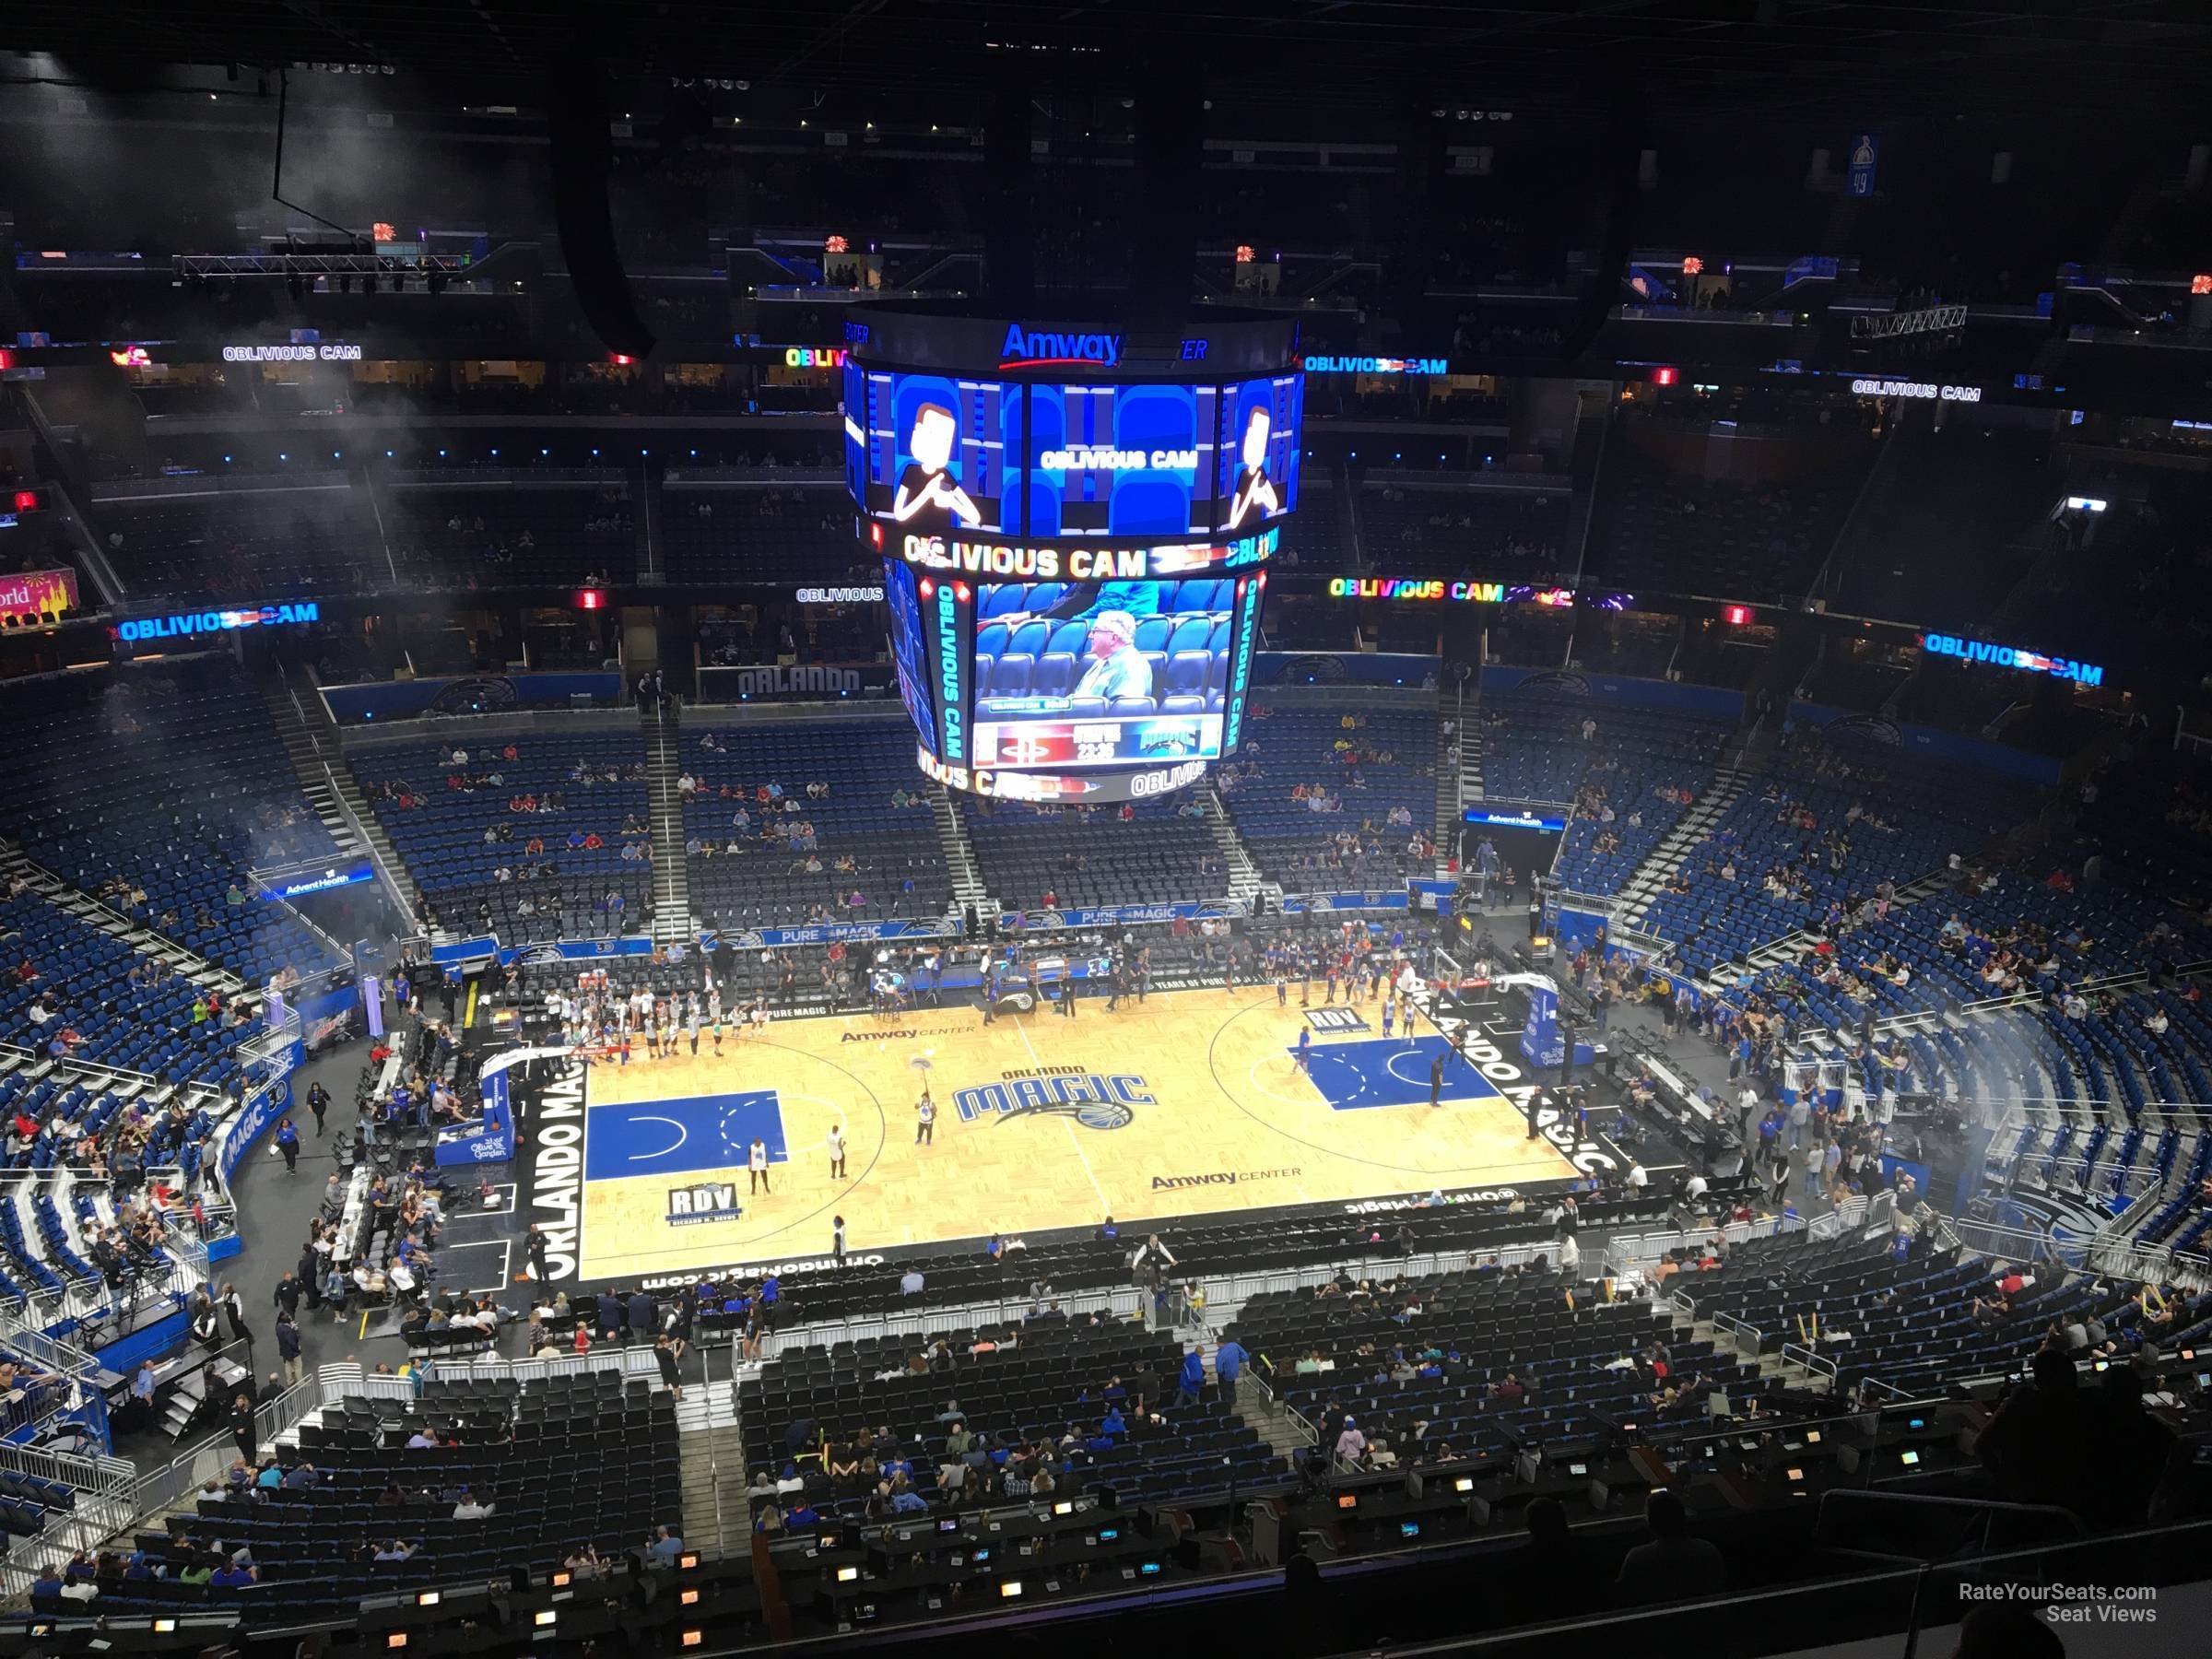 Section 206 at Amway Center 